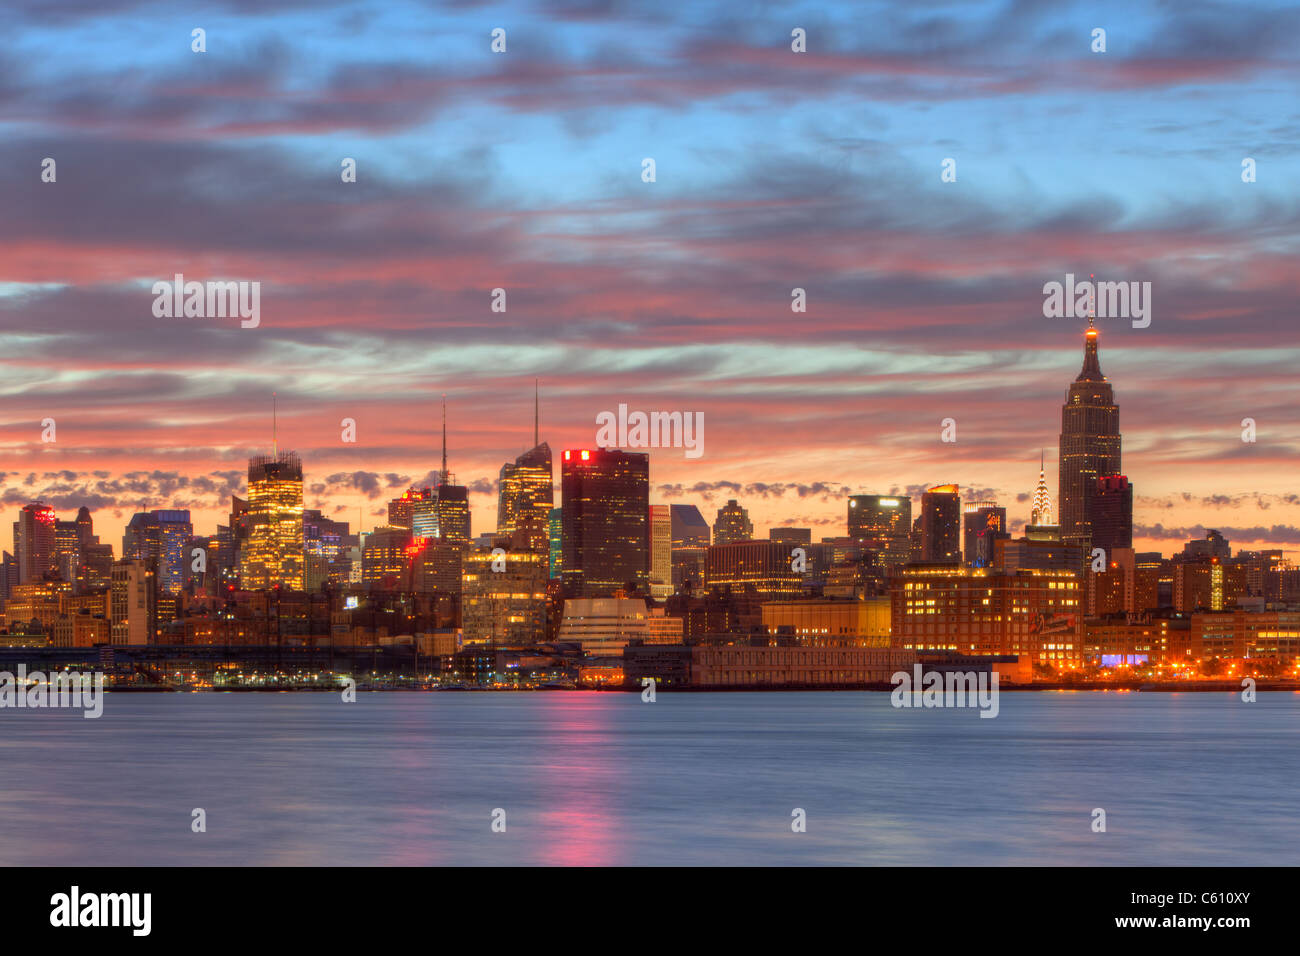 The sky begins to lighten and clouds reflect pre-sunrise color over the Empire State Building and the midtown Manhattan skyline Stock Photo